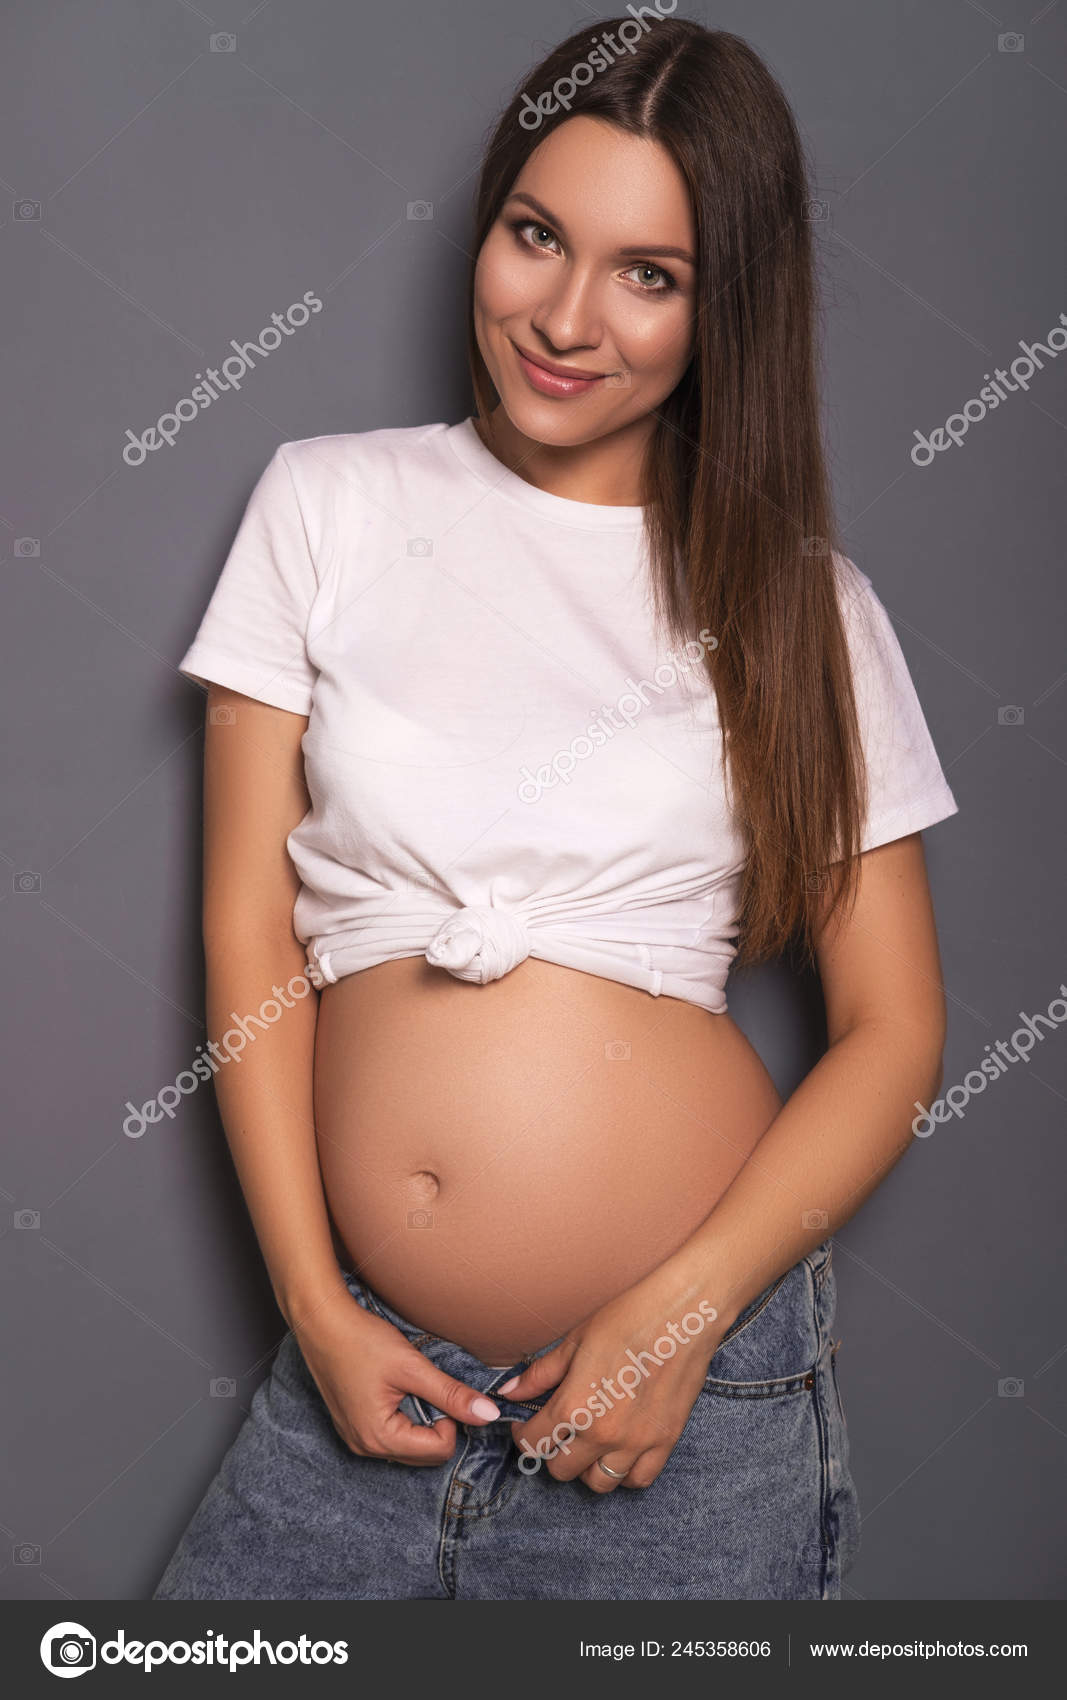 Grey Haired Woman Pregnant